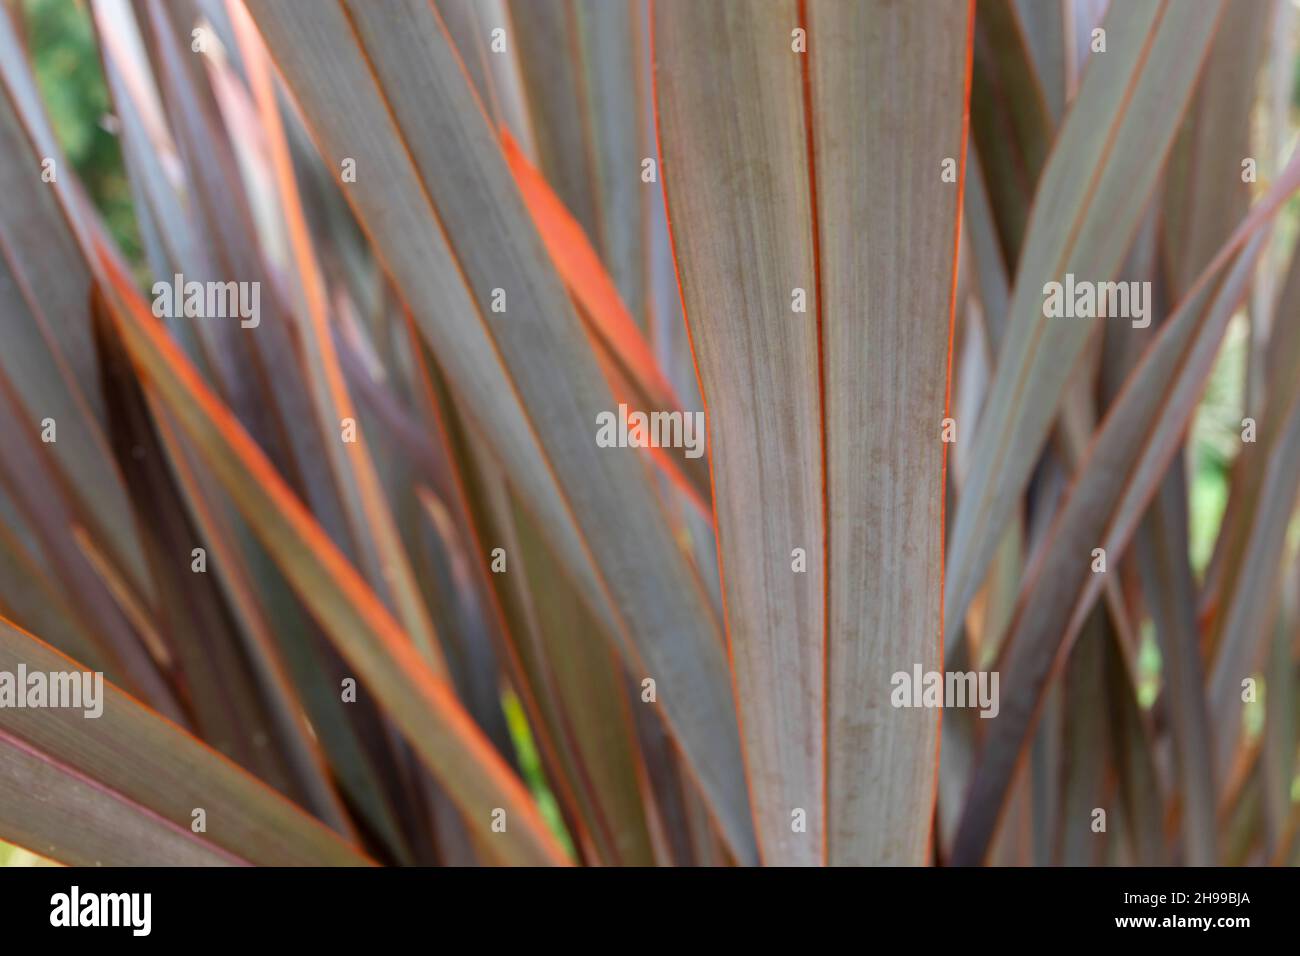 Decorative phormium plant with bright orange leaves margins blurred natural background. New Zealand flax. Stock Photo